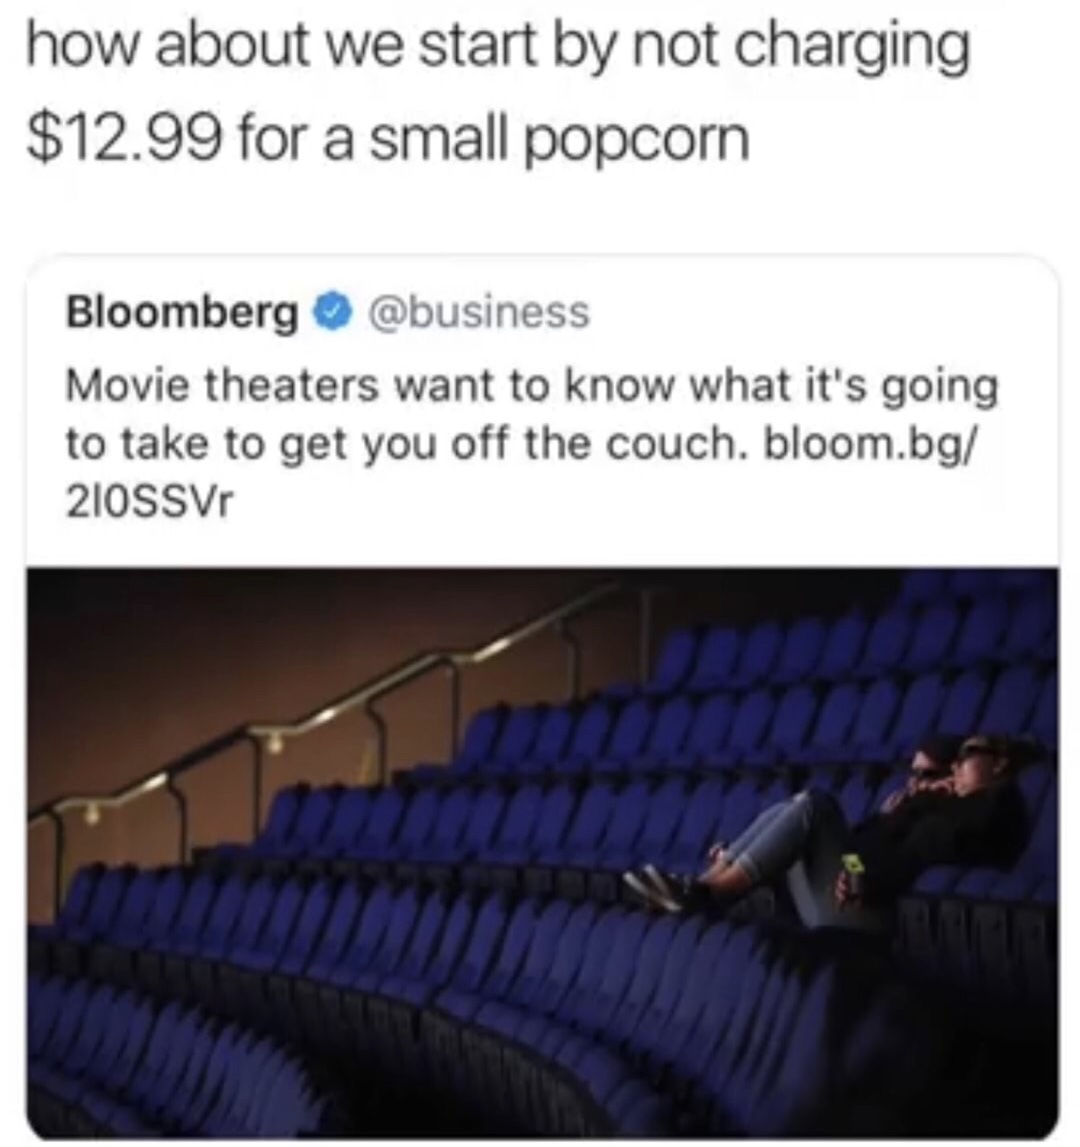 memes - presentation - how about we start by not charging $12.99 for a small popcorn Bloomberg Movie theaters want to know what it's going to take to get you off the couch. bloom.bg 210SSV